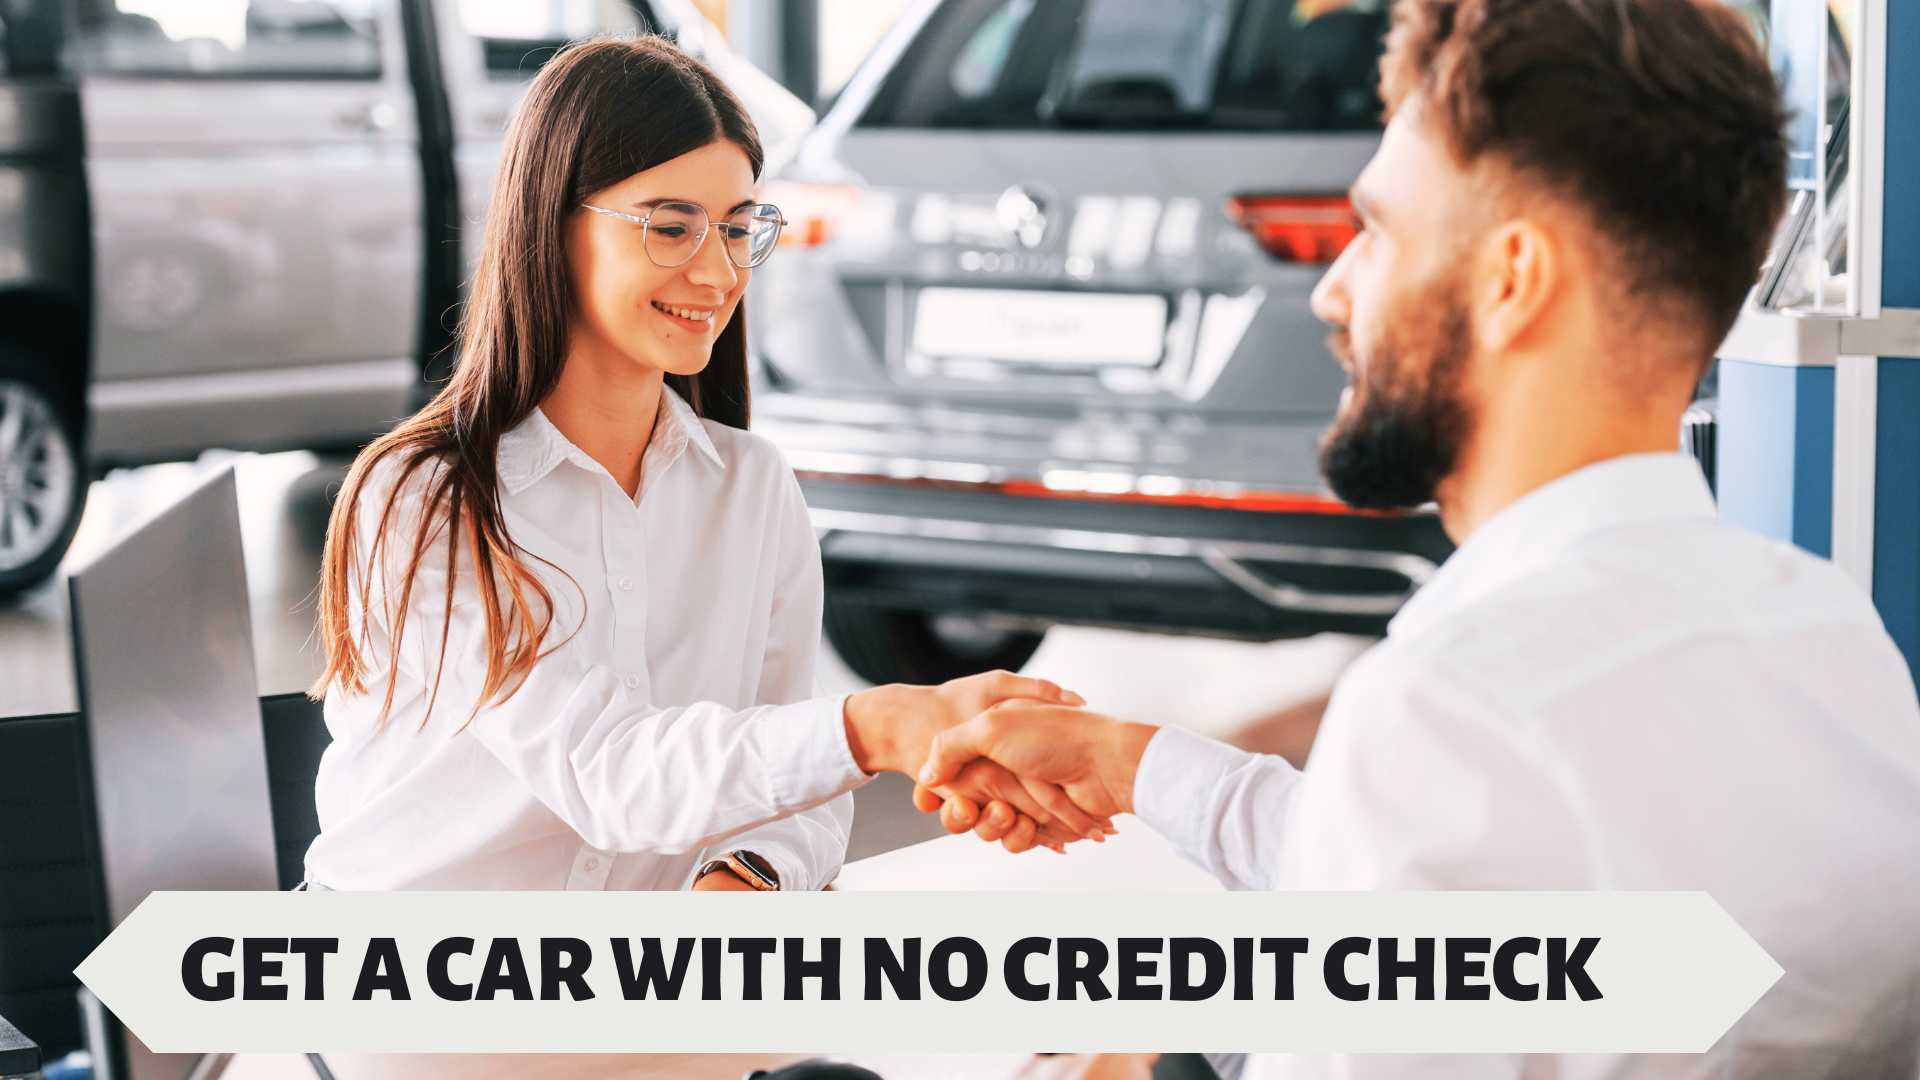 Smiling lady shaking hands with a car dealer